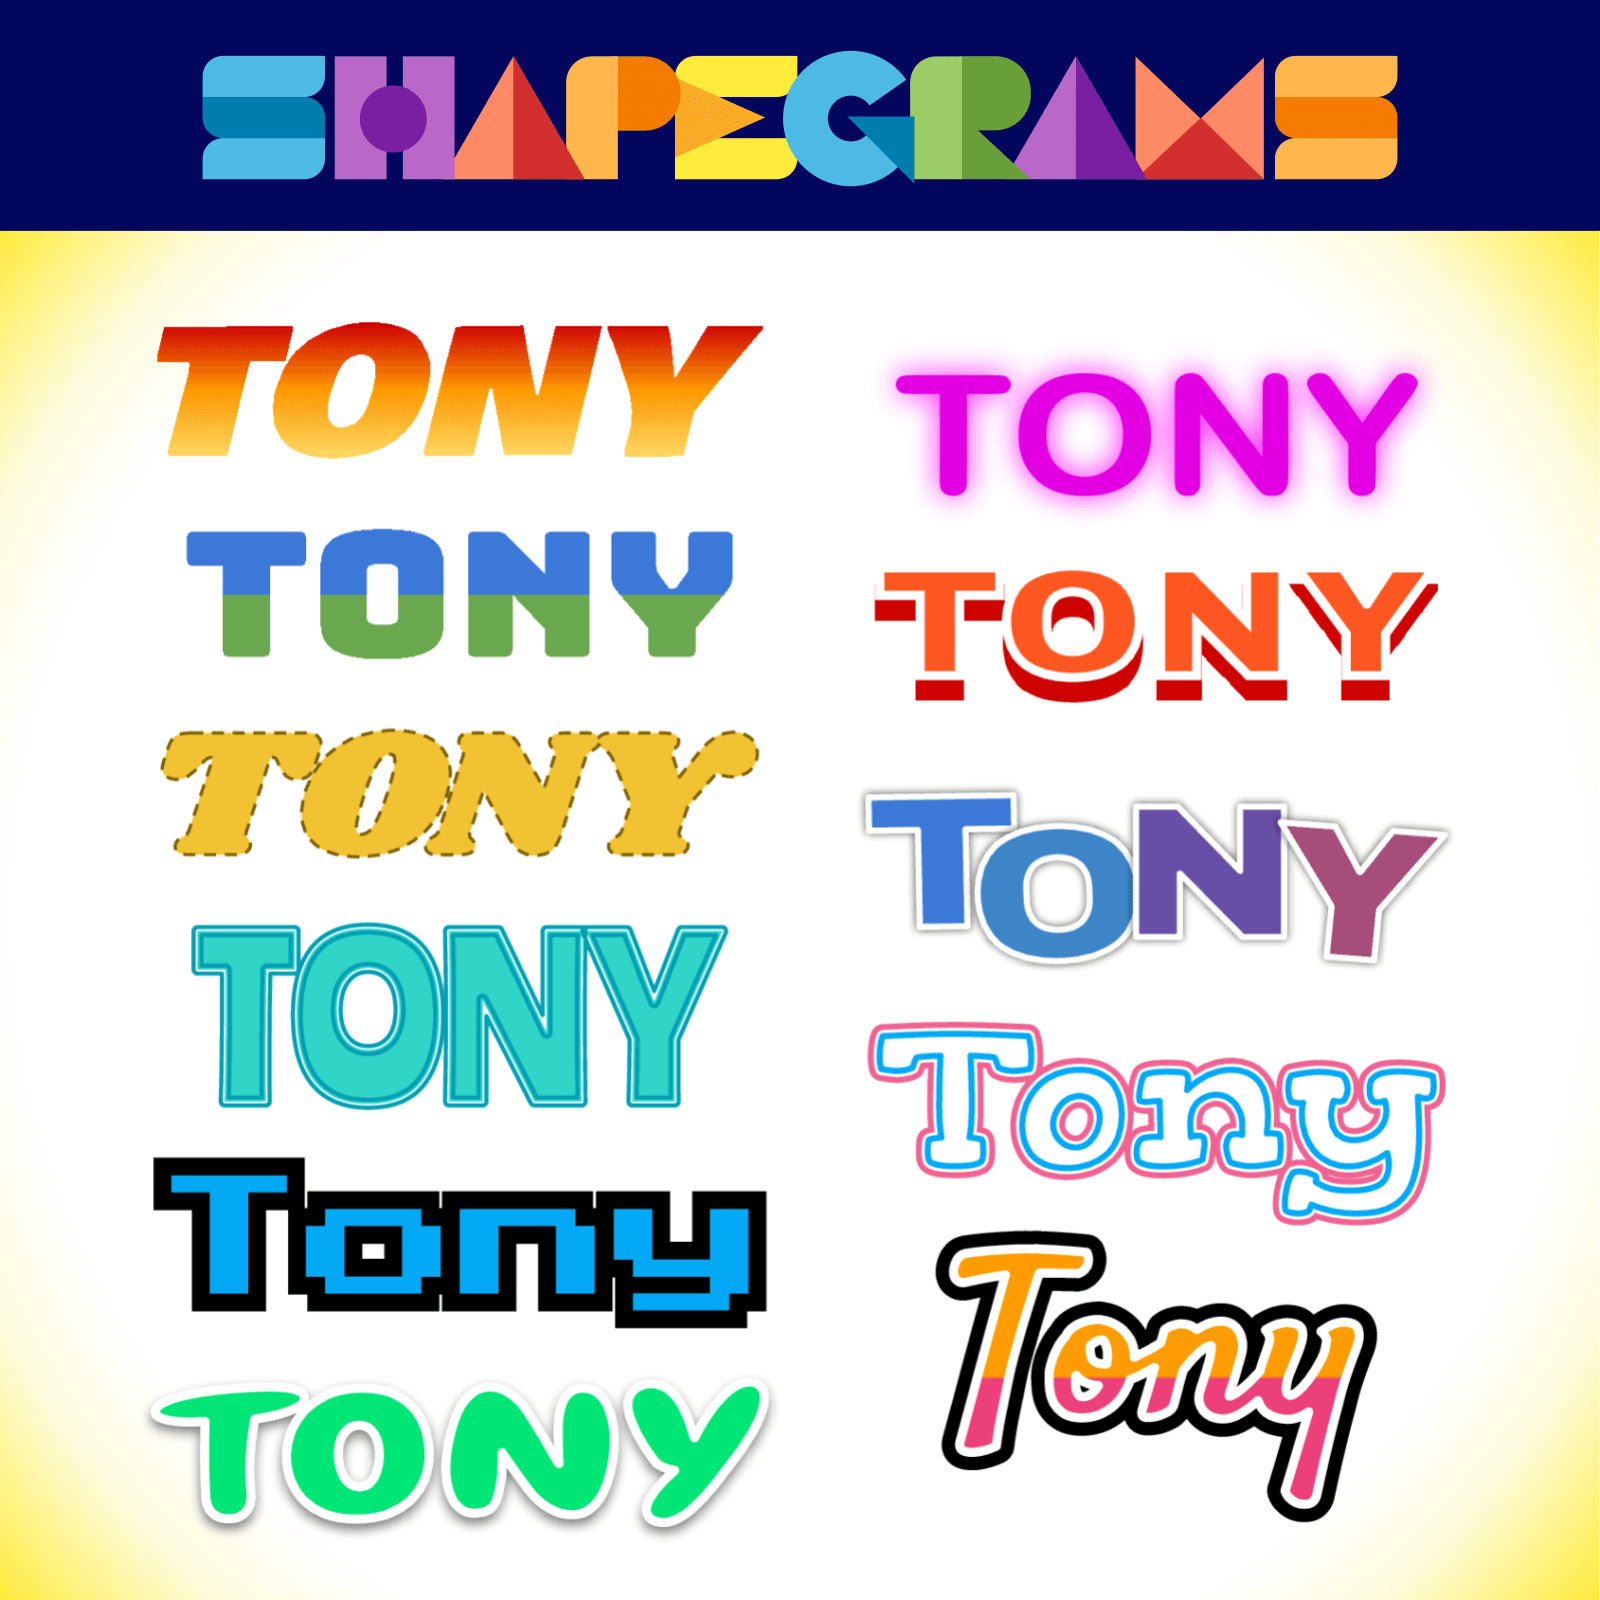 The name Tony styled in many different ways